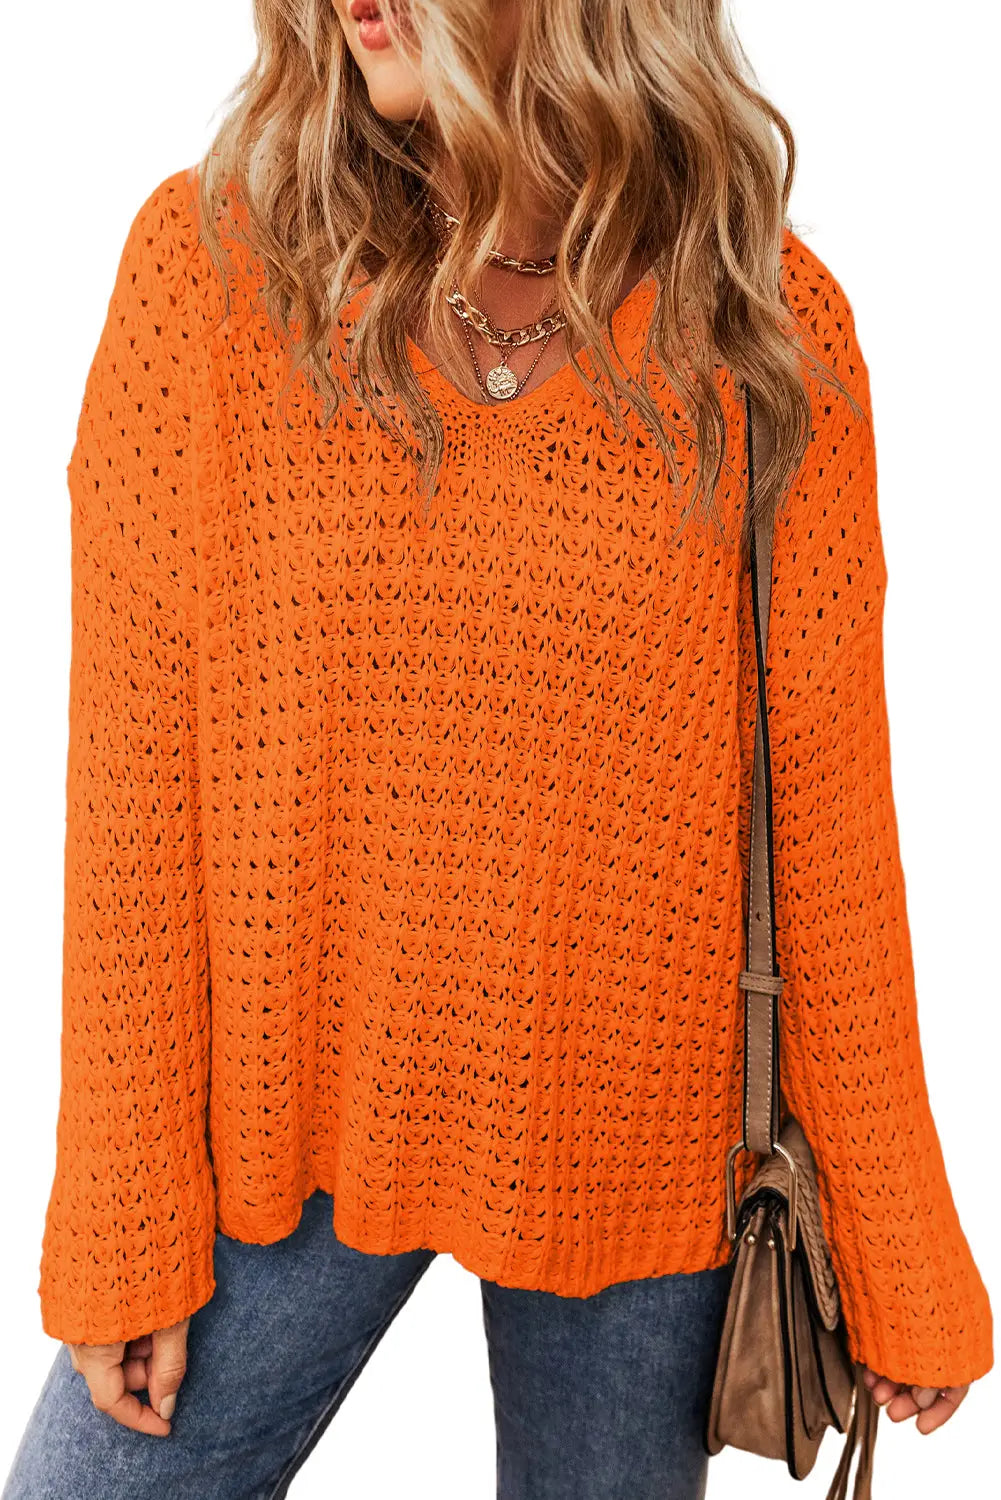 Carrot hollow-out crochet v neck sweater - sweaters & cardigans